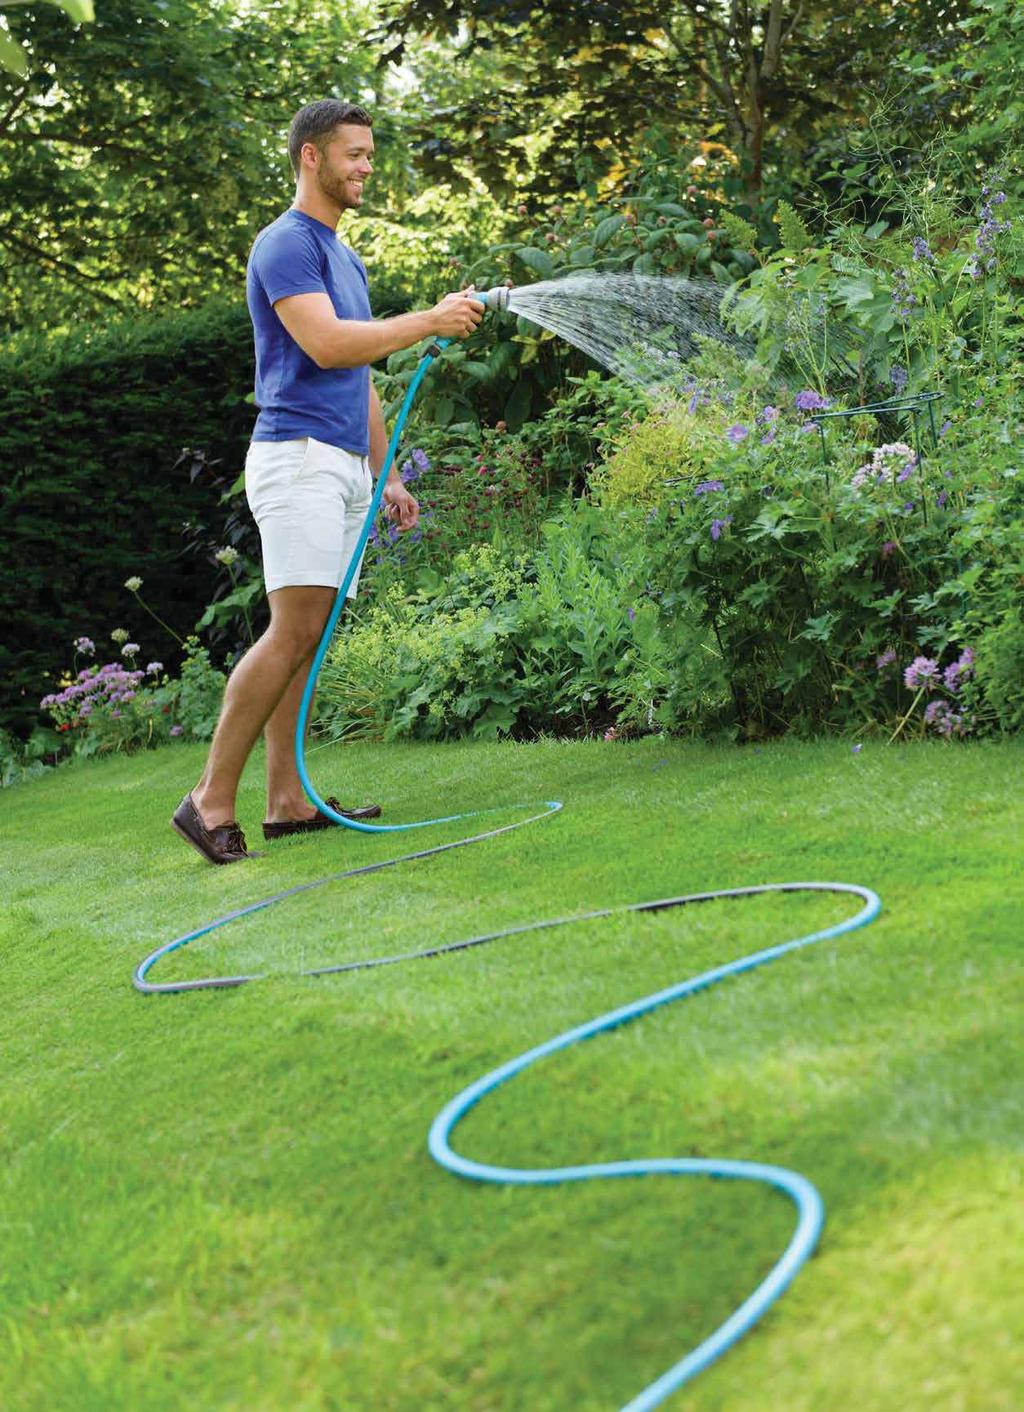 of hosepipes from entry level to expert. All hosepipes are resistant and come in 15m, 30m and 50m lengths. hosepipes have enhanced performance to meet general watering needs.